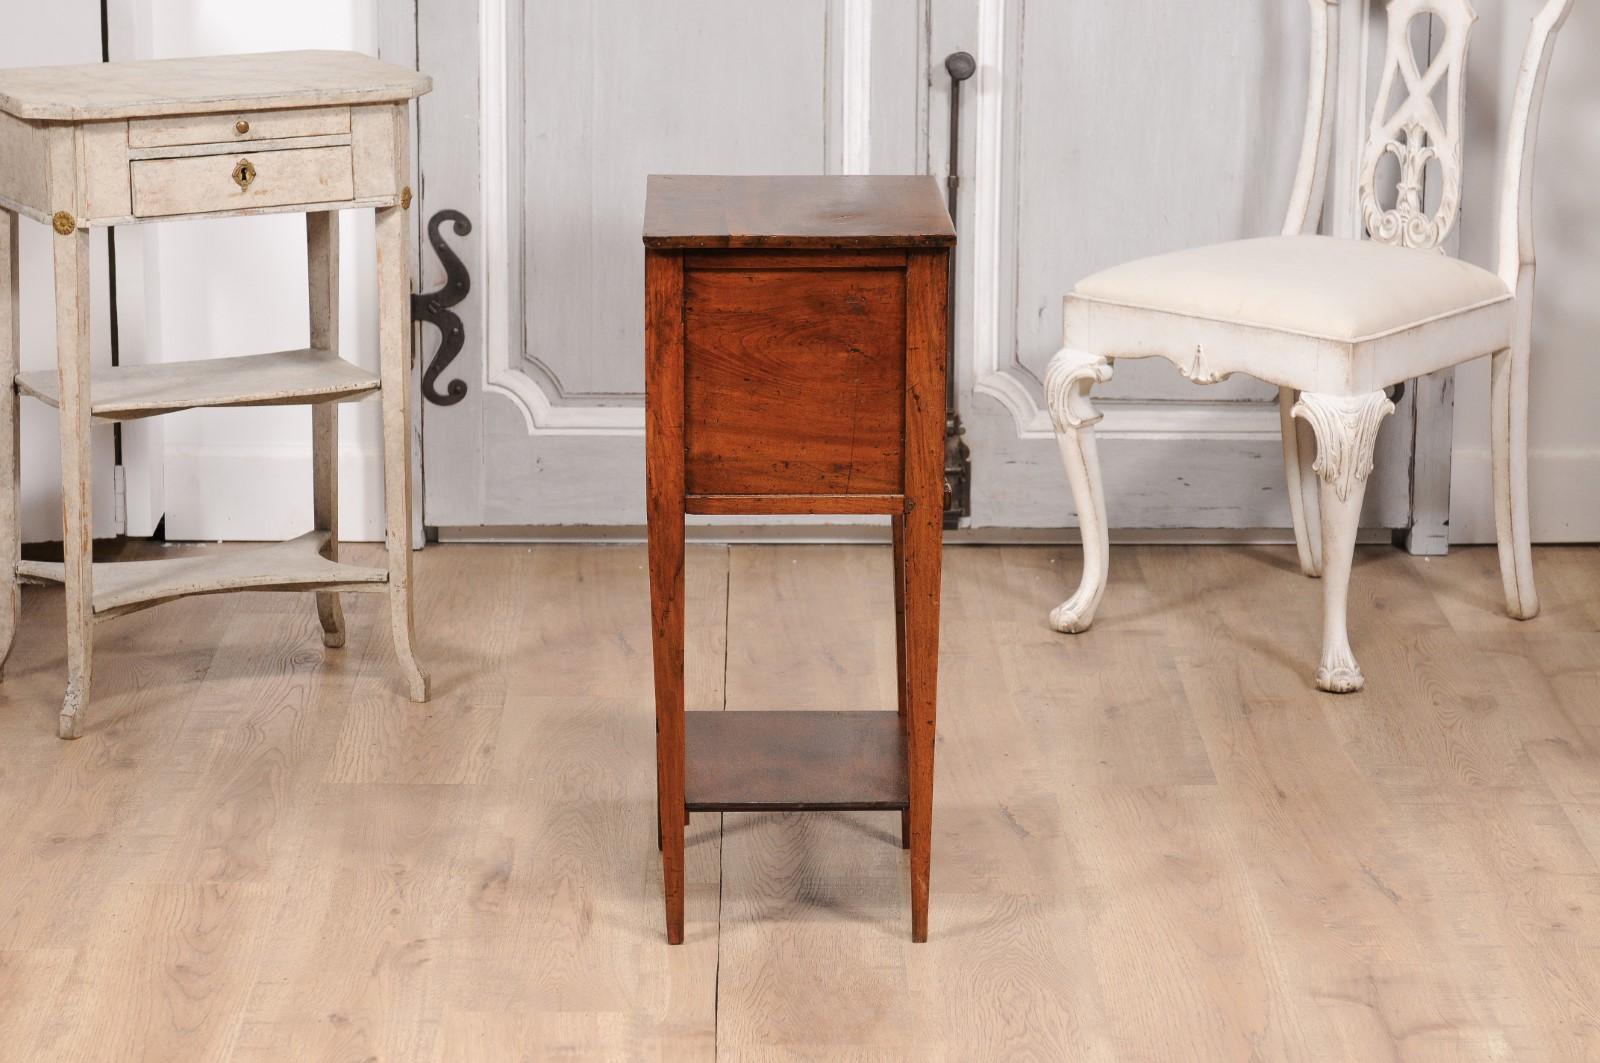 18th Century Italian Walnut Bedside Table with Three Drawers and Tapering Legs For Sale 9